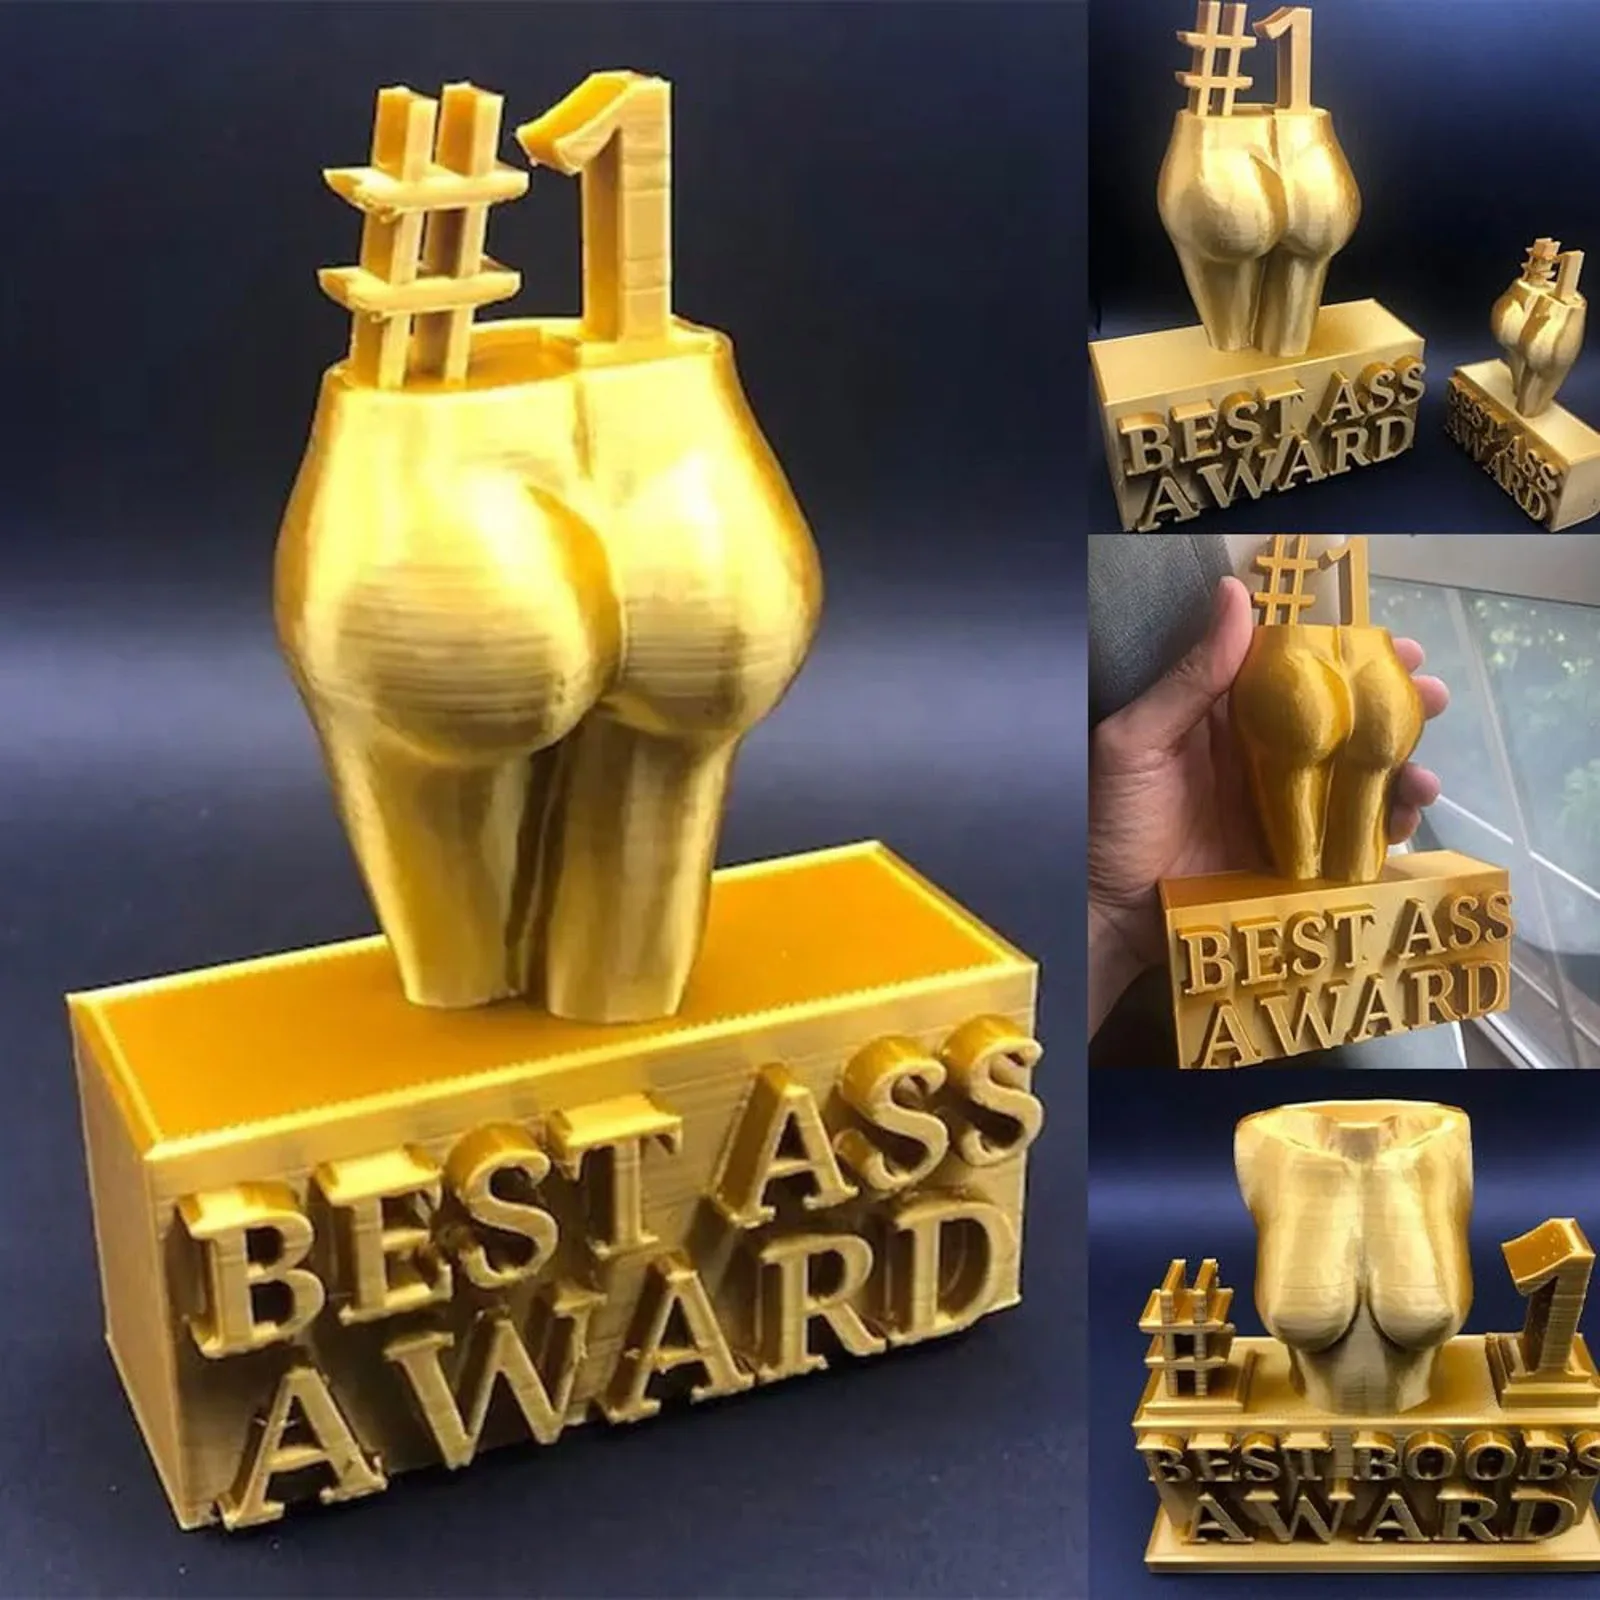 

Golden Award Statue Best Ass Boobs Gold Trophy Tabletop Ornament Win Cup Resin Figurine No Deforming For Living Room Home Decor